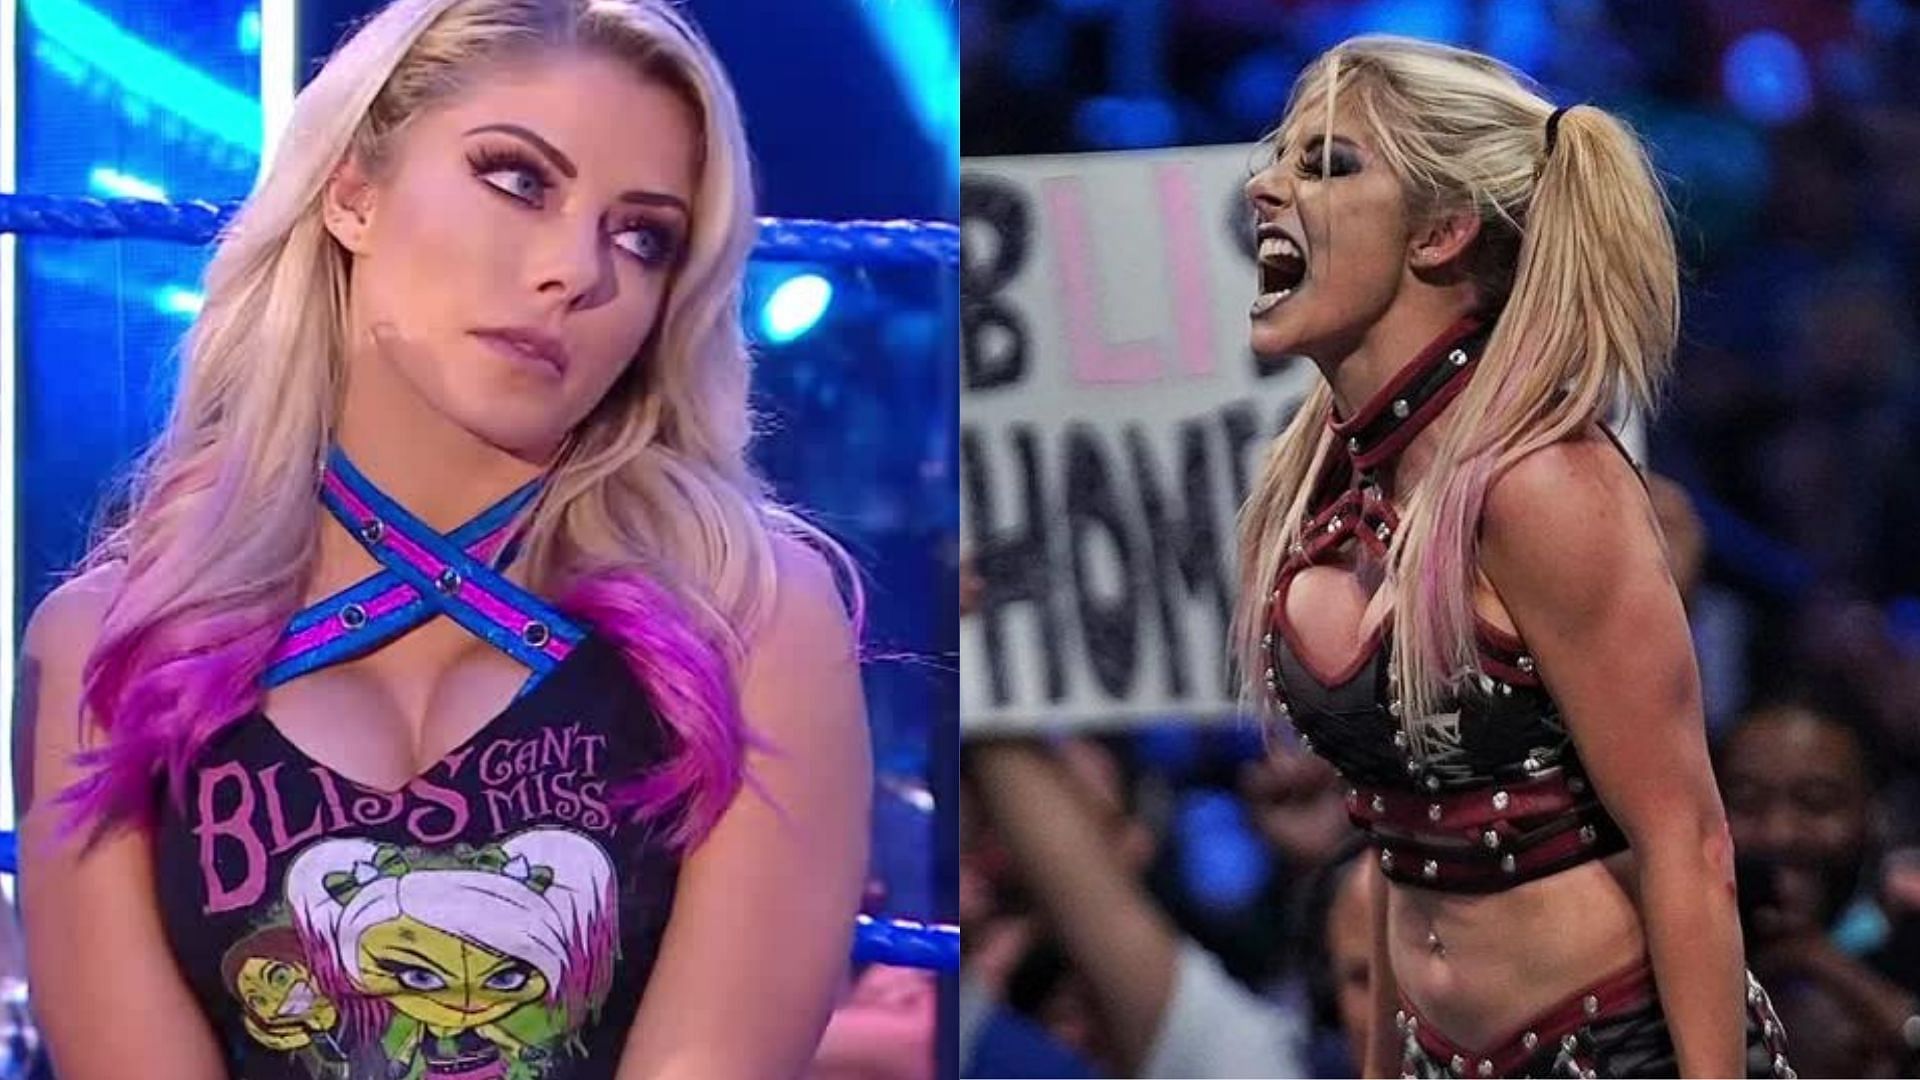 Alexa Bliss was unsuccessful in beating Bianca Belair on RAW